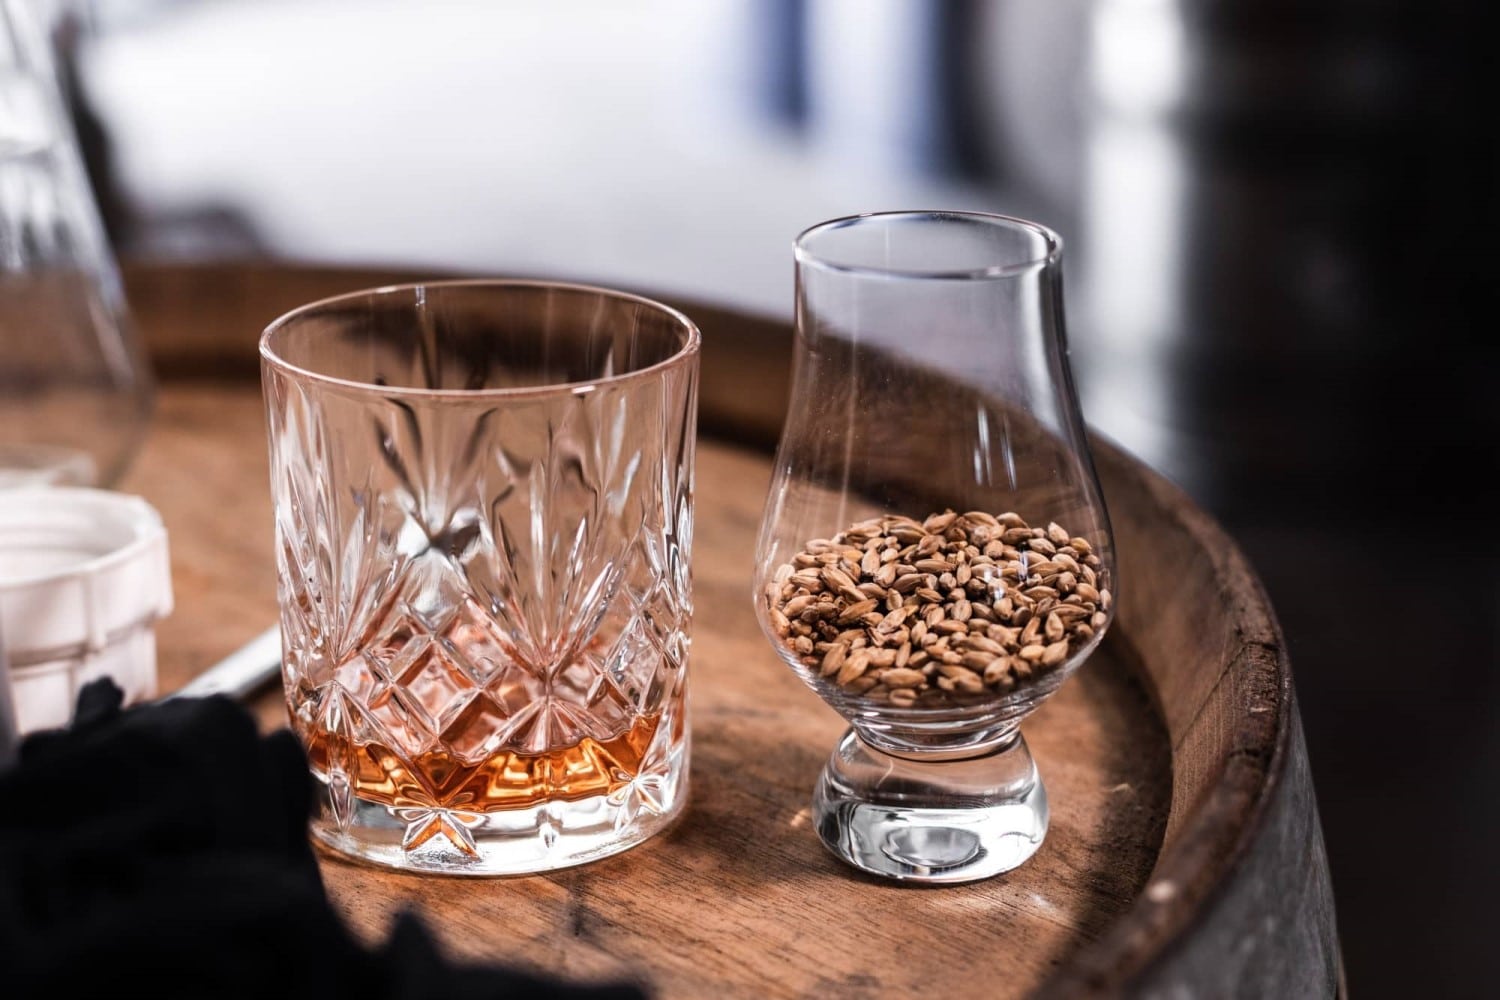 Scotch types go from blended malt to single grain